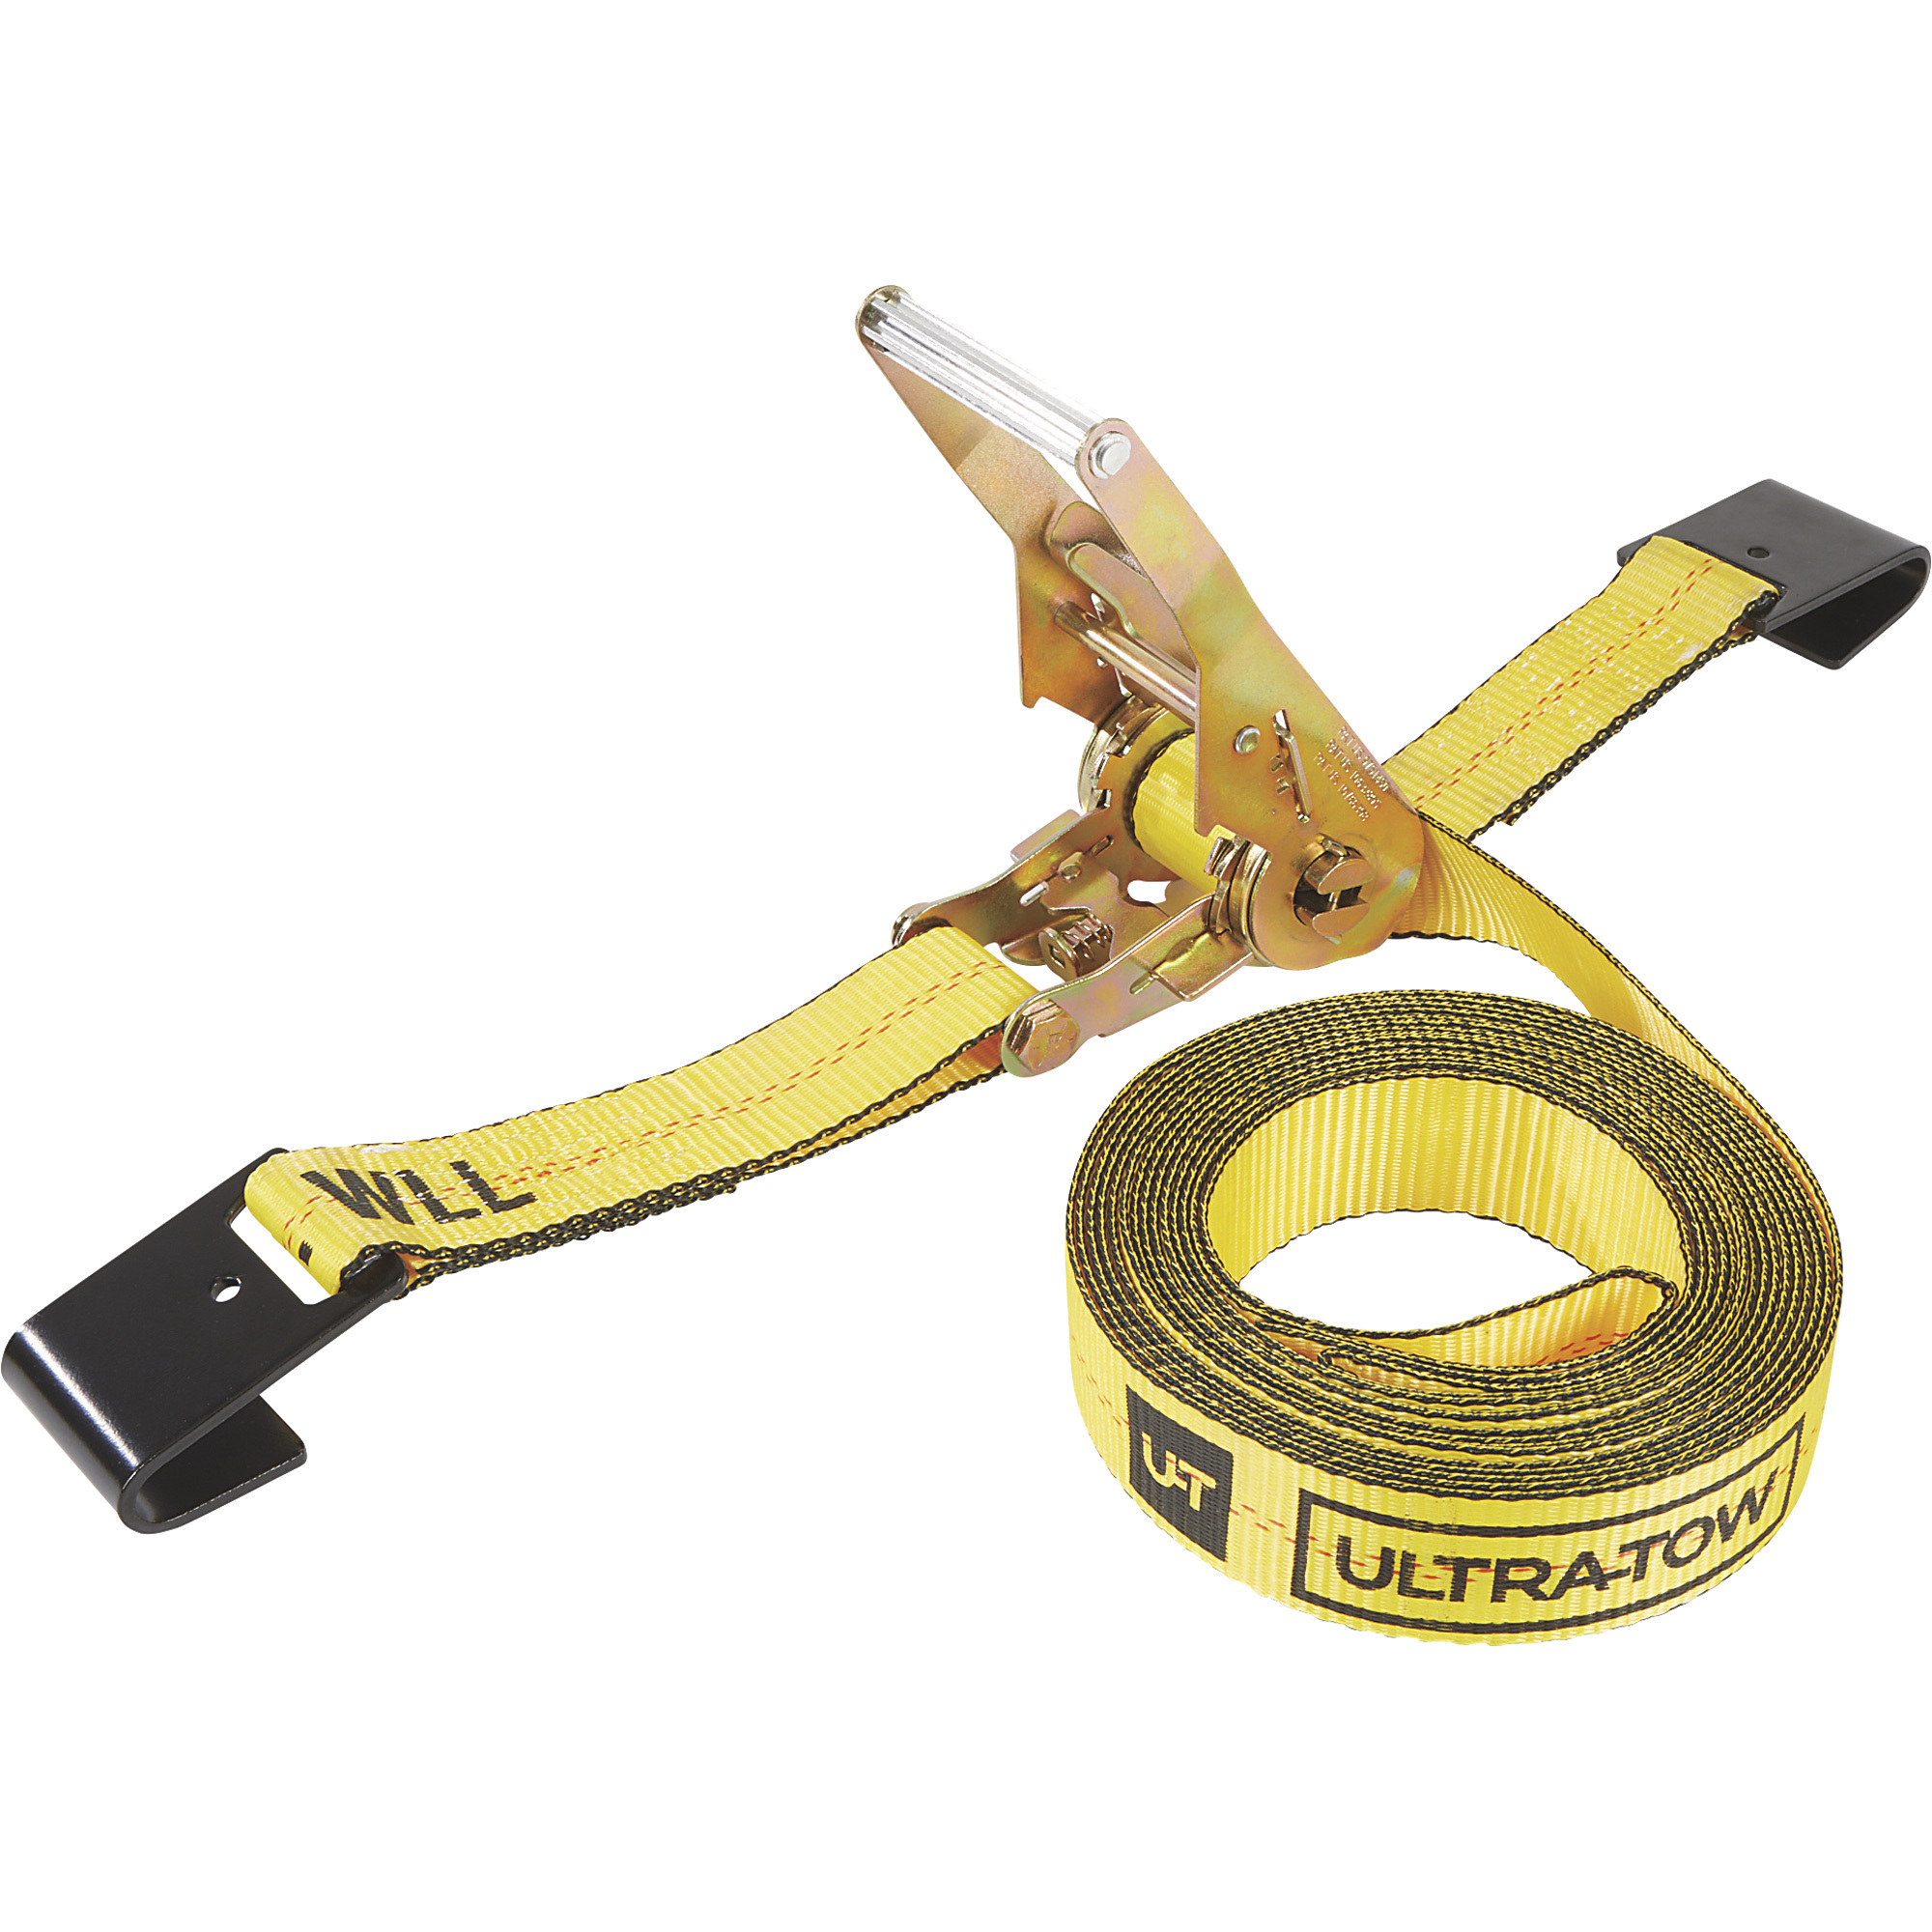 Ultra-Tow 2Inch x 27ft. AST Ratchet Strap with Flat Hooks, 10,000-Lb. Breaking Strength, 3300-Lb. Working Load, Yellow, Model A815053